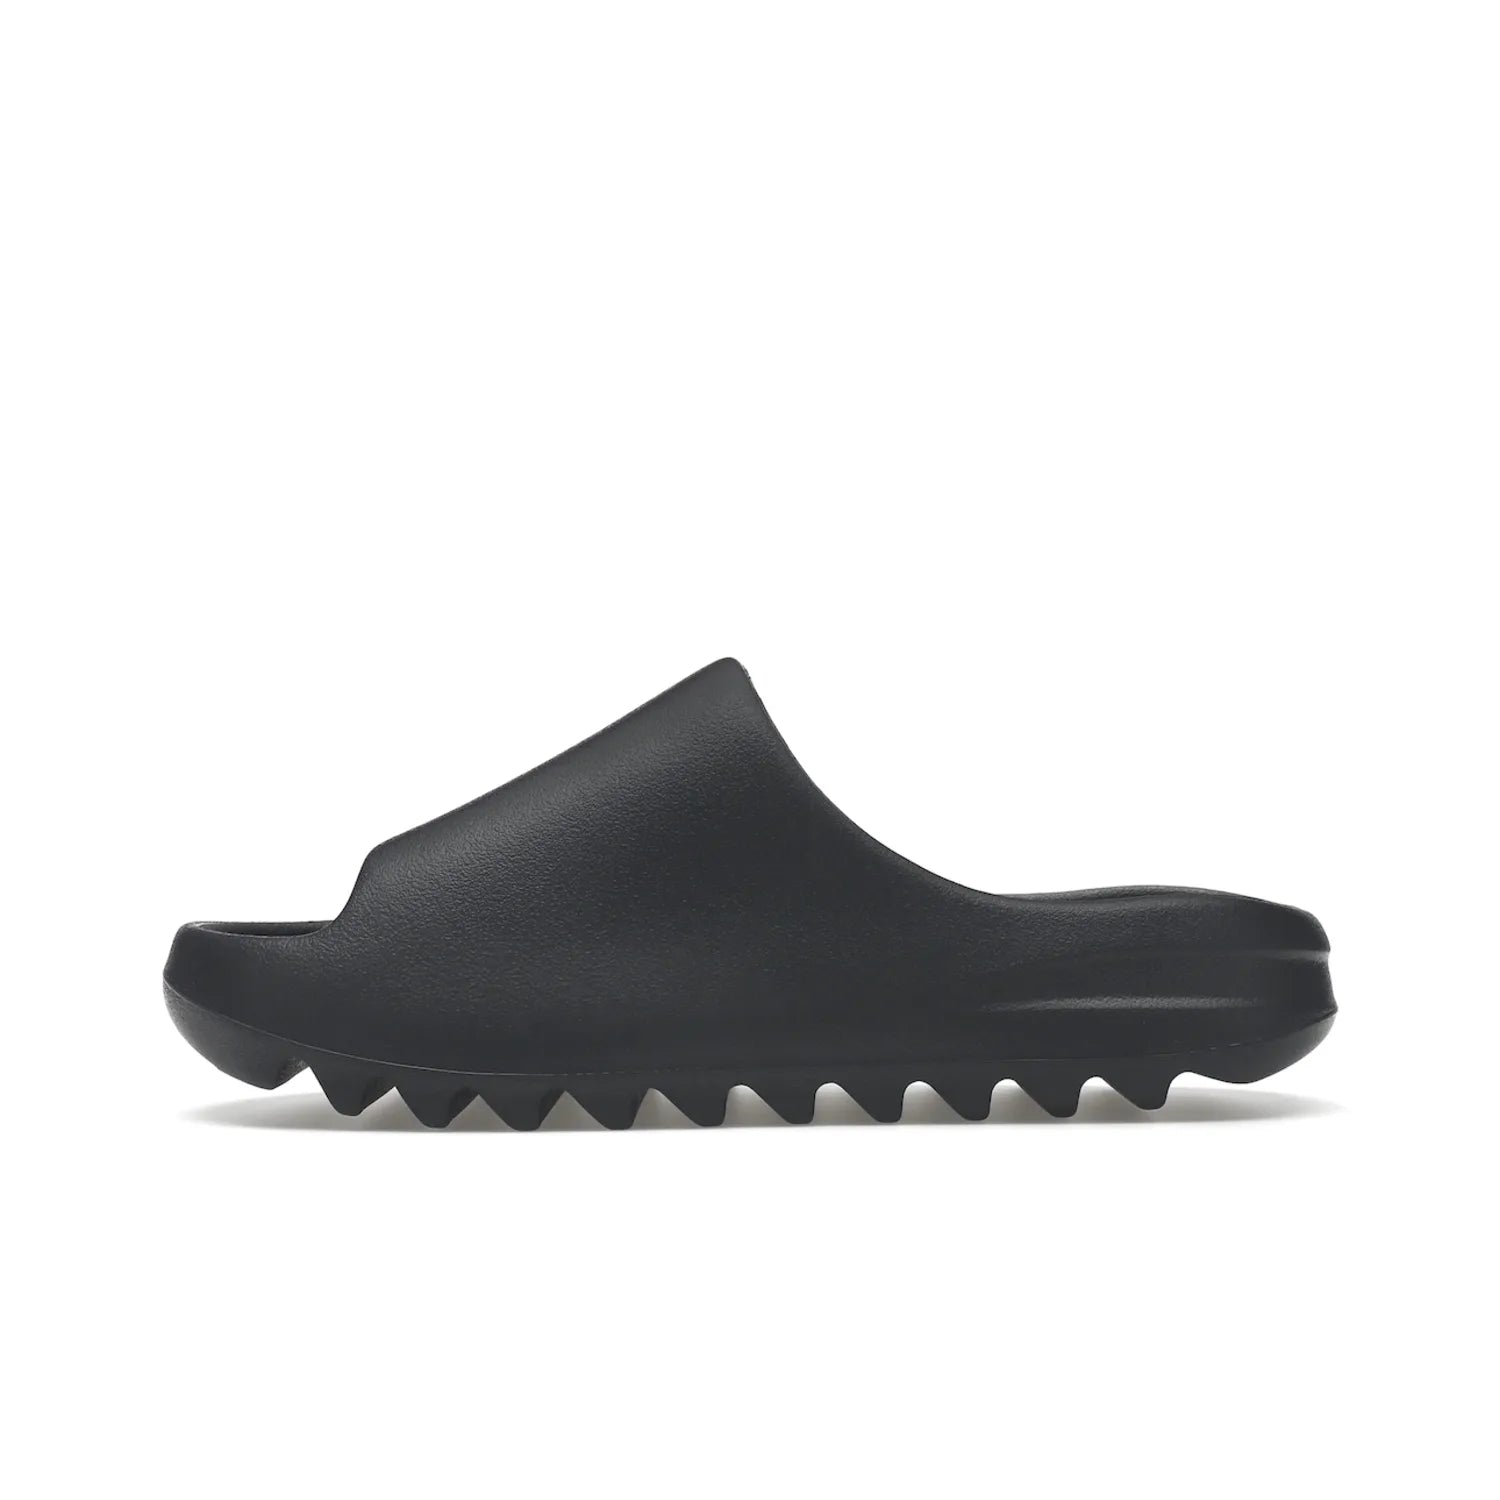 adidas Yeezy Slide Slate Grey - Image 19 - Only at www.BallersClubKickz.com - Stylish & comfortable adidas Yeezy Slide Slate Grey features an EVA foam upper, strategic cutouts, textured outsole pattern, & easy slip-on design for modern comfort & classic style.